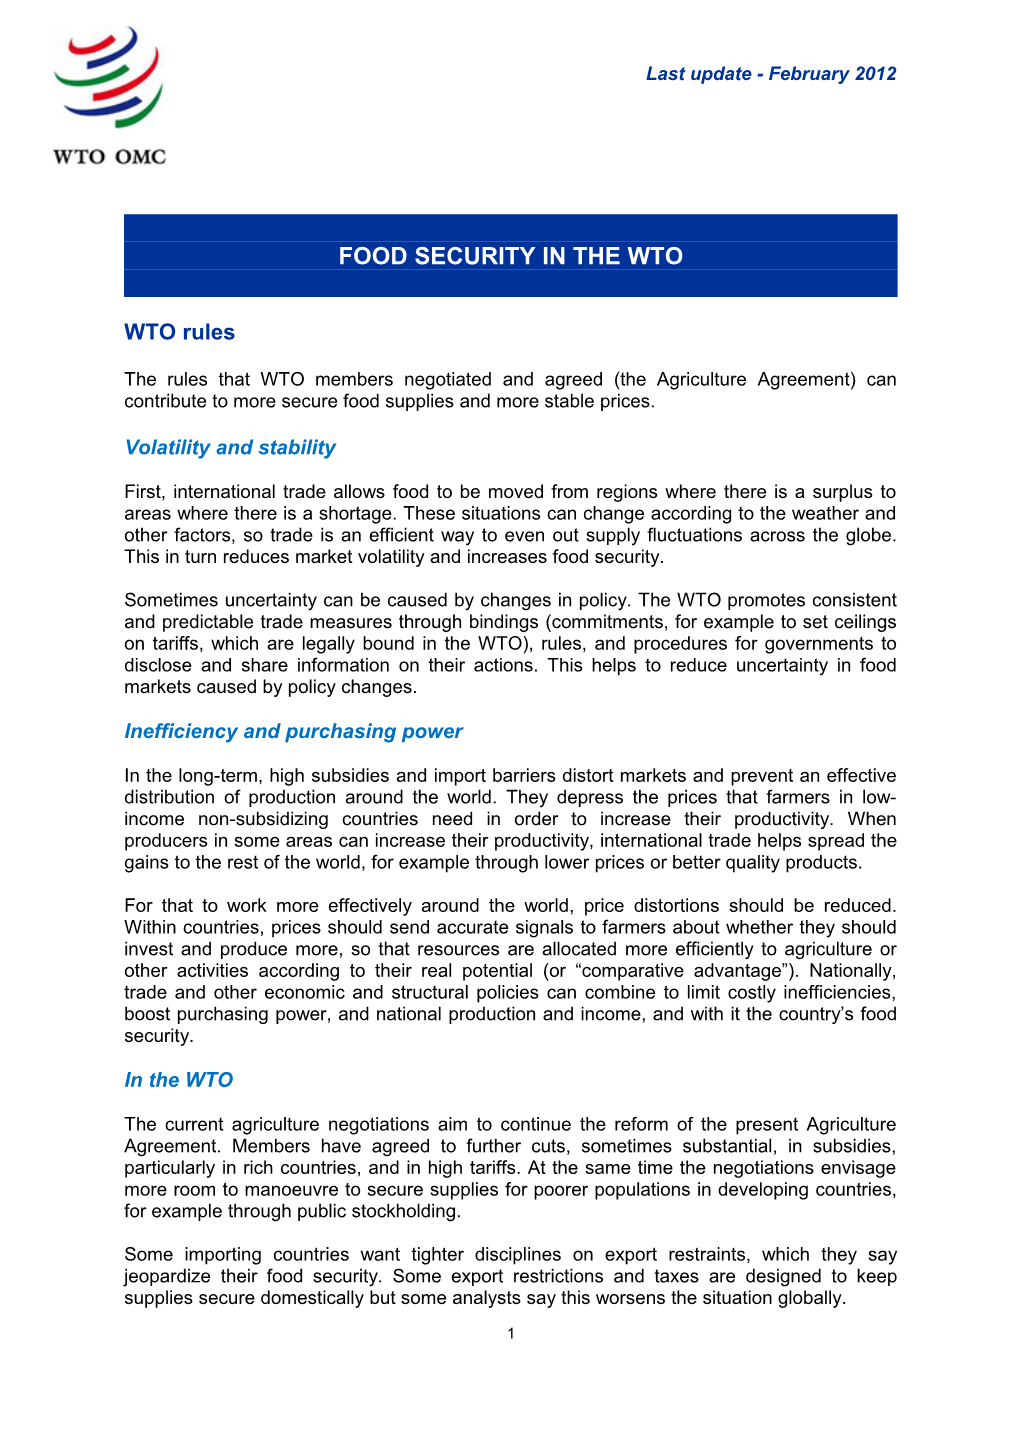 Food Security in the Wto